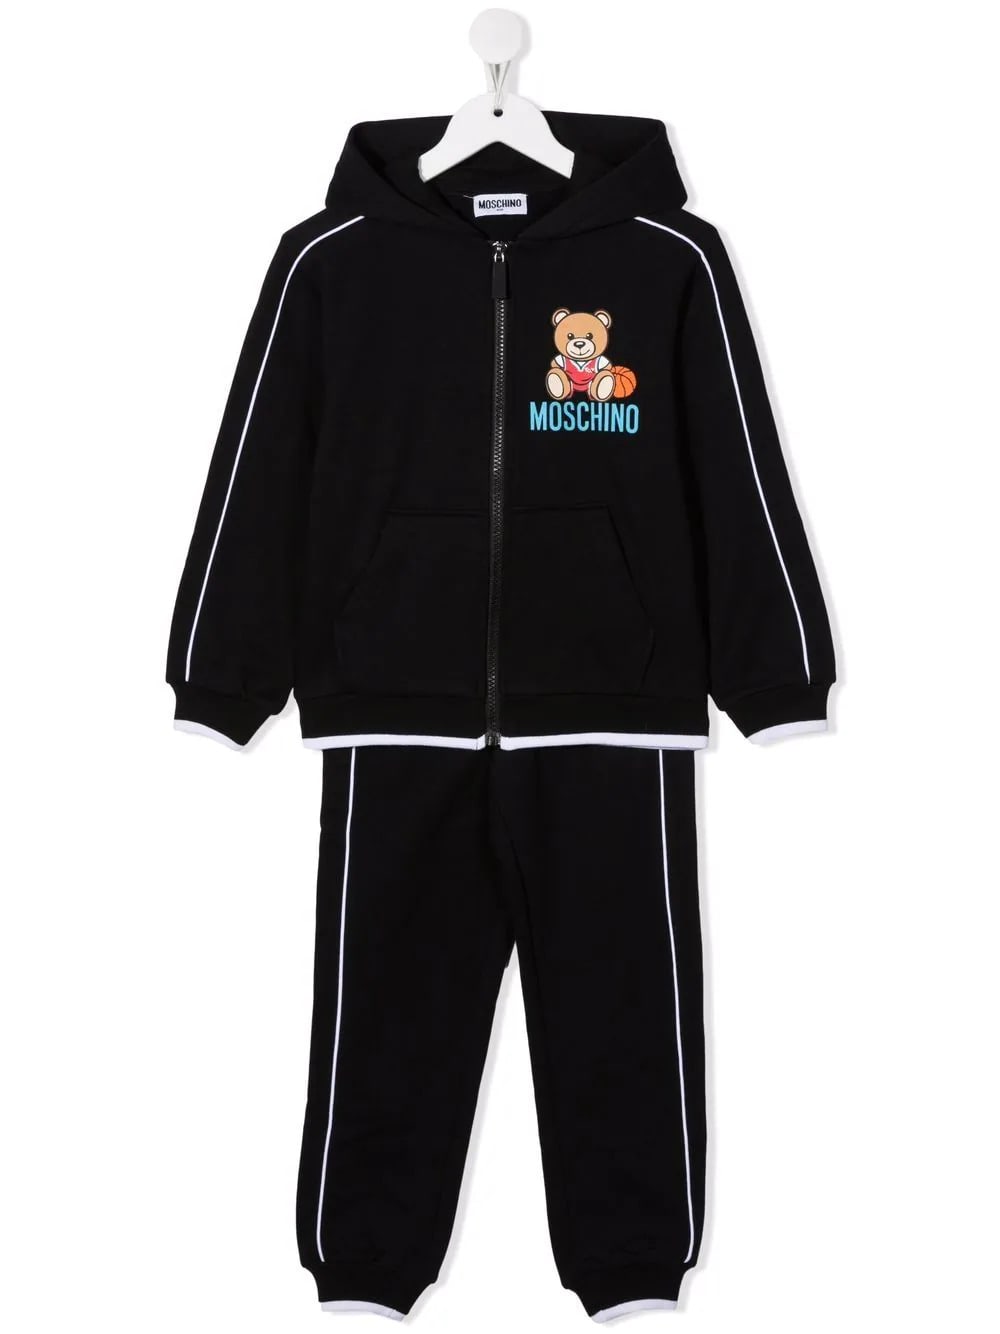 Moschino Kids Black Sports Suit With Basketball Teddy Bear Print